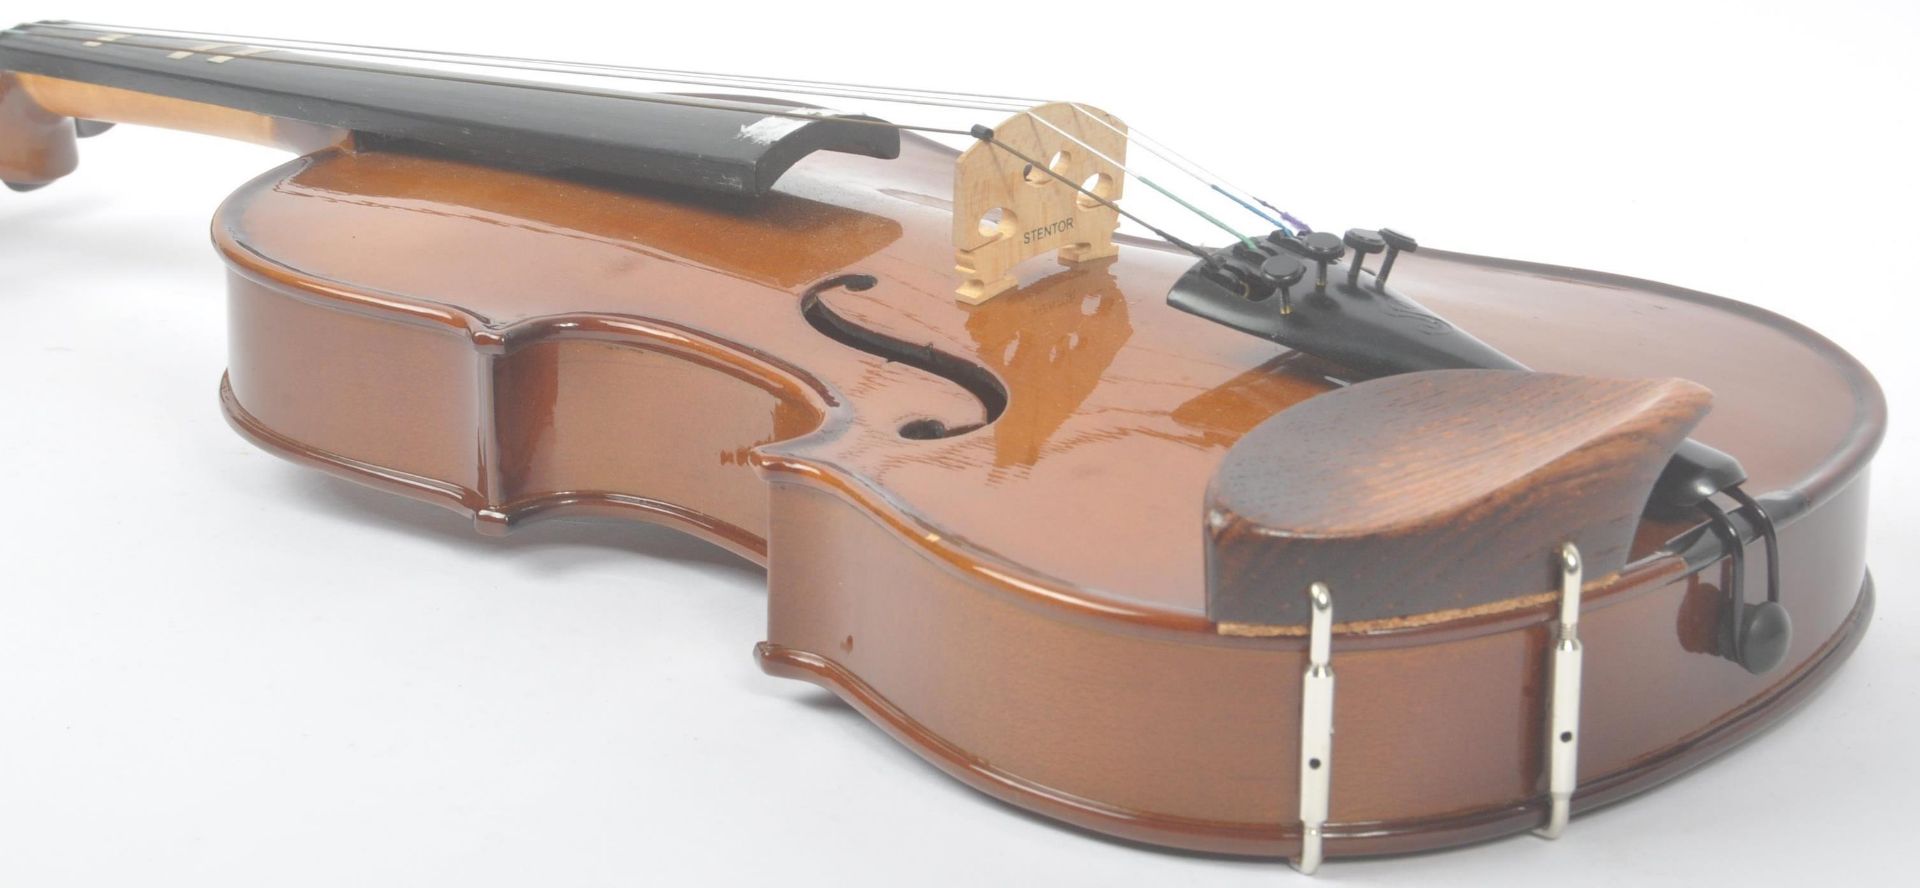 STENTOR - 20TH CENTURY 3/4 STUDENT I VIOLIN W/ BOW AND CASE - Image 6 of 7